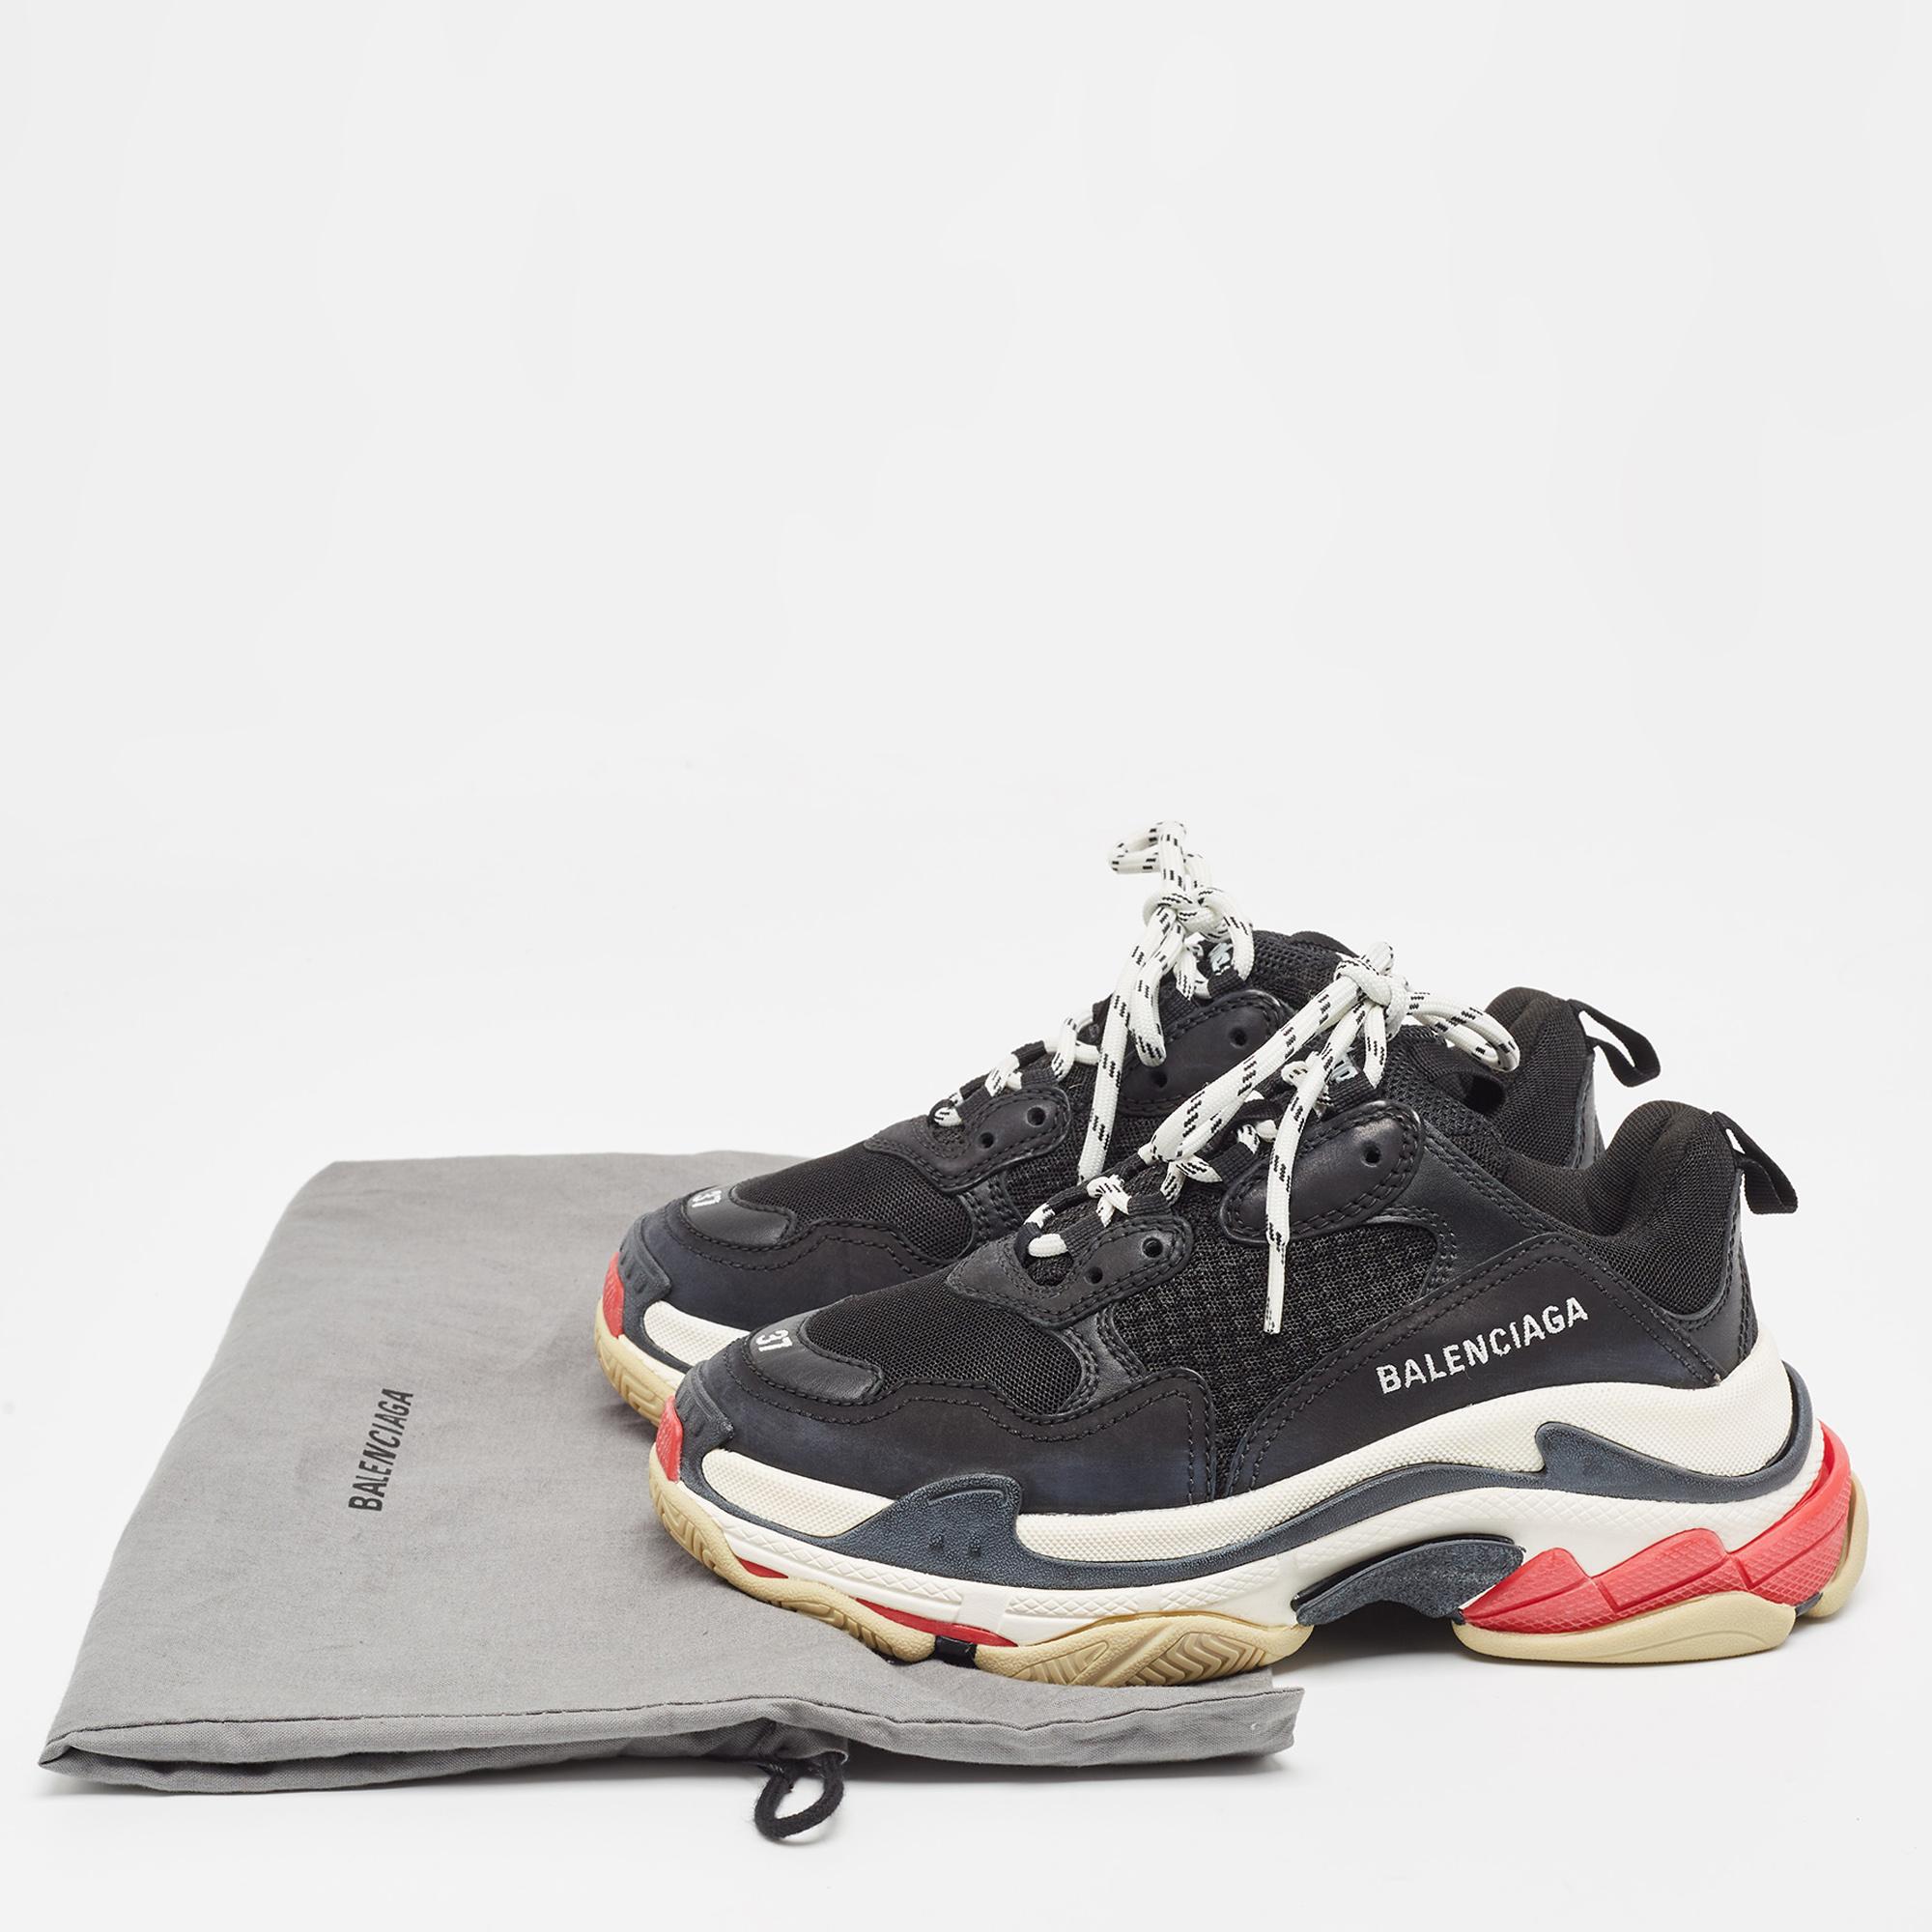 Balenciaga Black Mesh and Leather Triple S Sneakers Size 37 For Sale 5